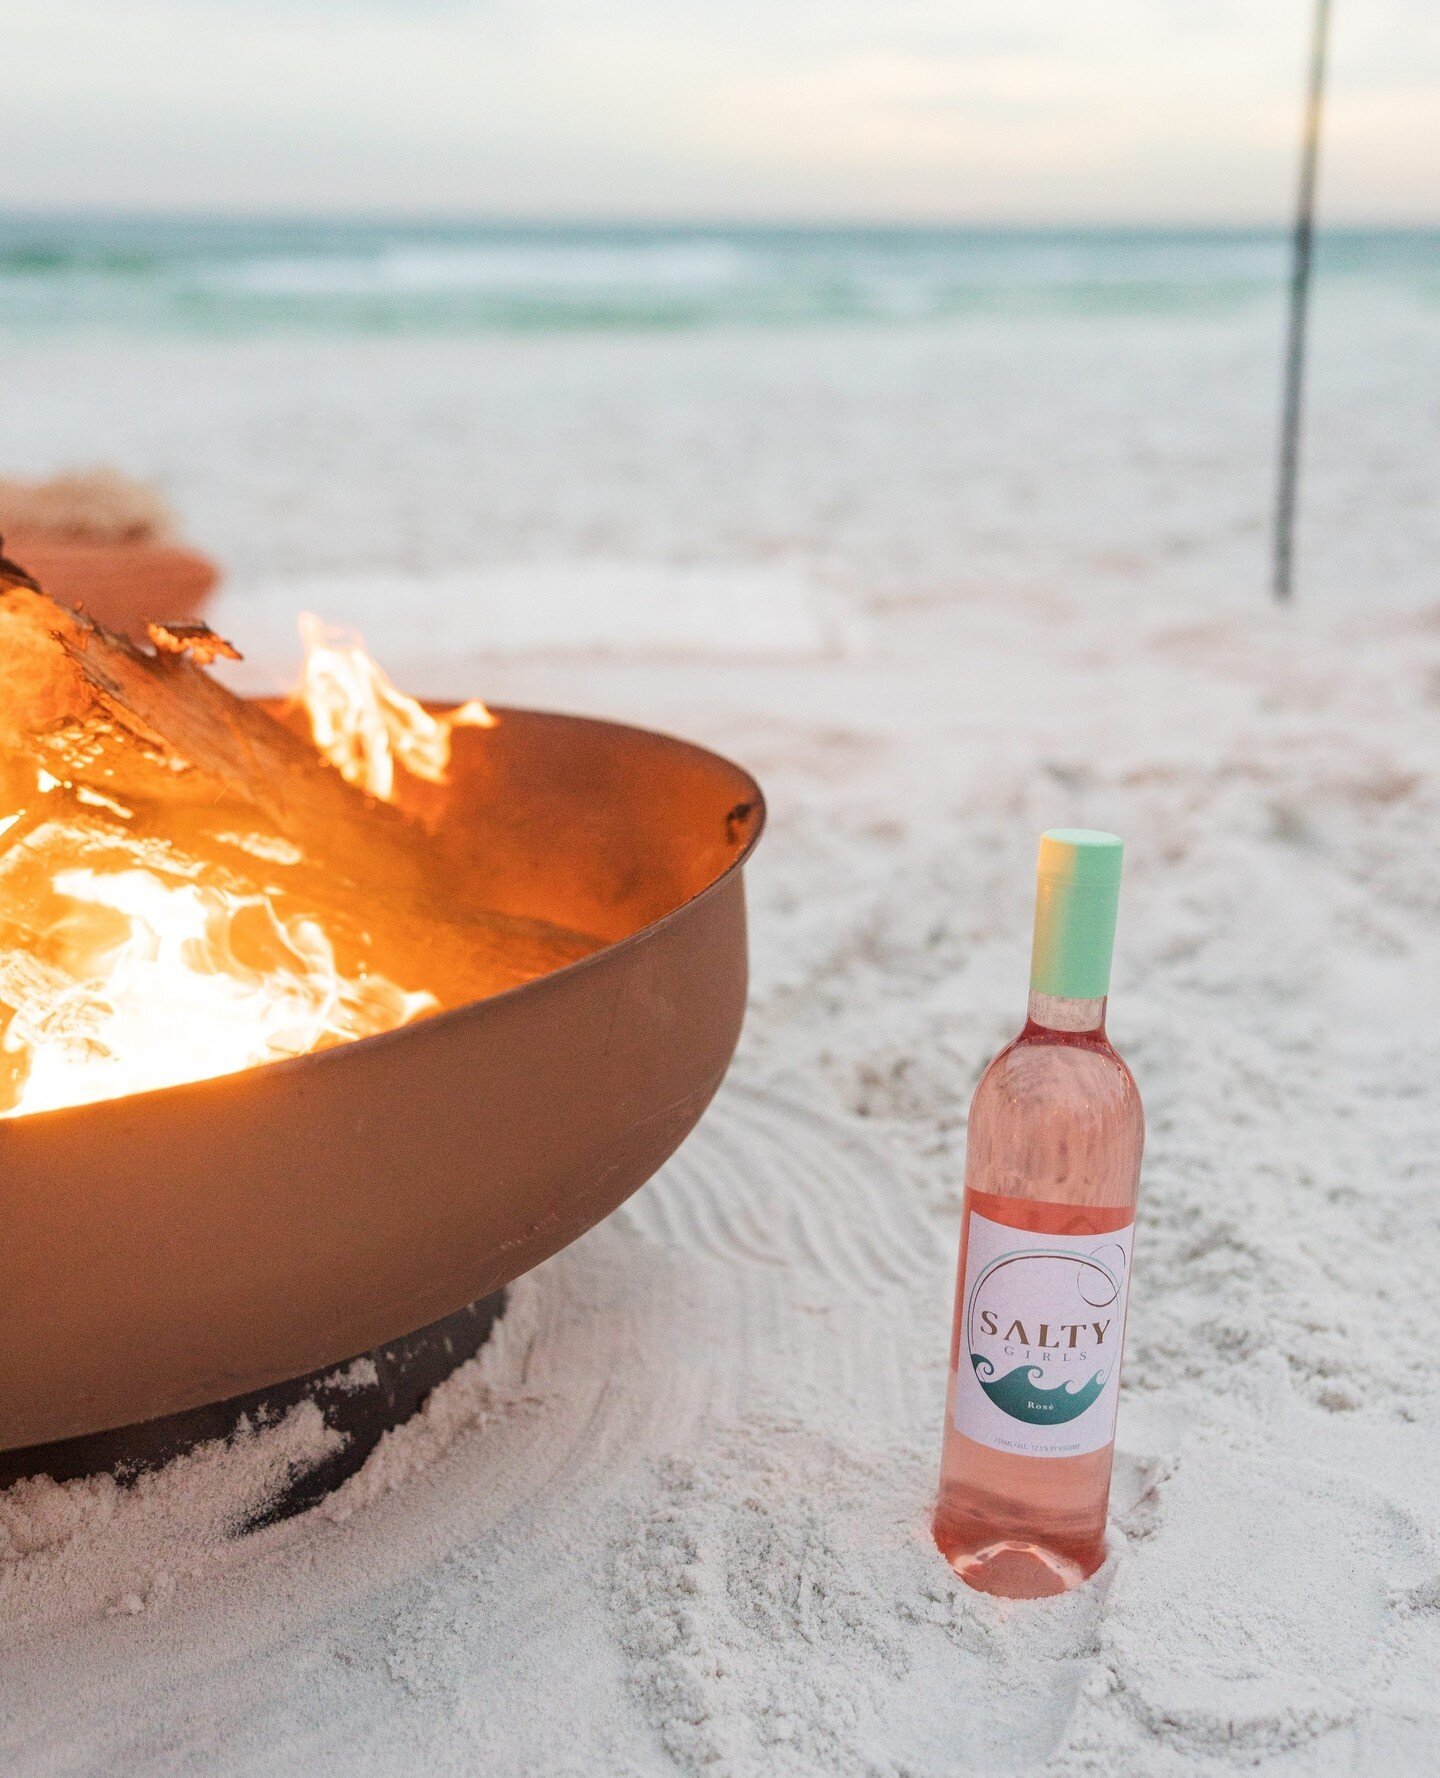 Our favorite duo... the beach + Salty Ros&eacute; 🤝⁠
⁠
⁠
🥂 Get yours ➡️ saltybeverages.com⁠
⁠
#sipsalty #winelover #30a #rosewine #floridalife #beachlife #beachvibes #vin #ros&eacute; #vinros&eacute; #wine #frenchwine #winelovers #winetime #winewin